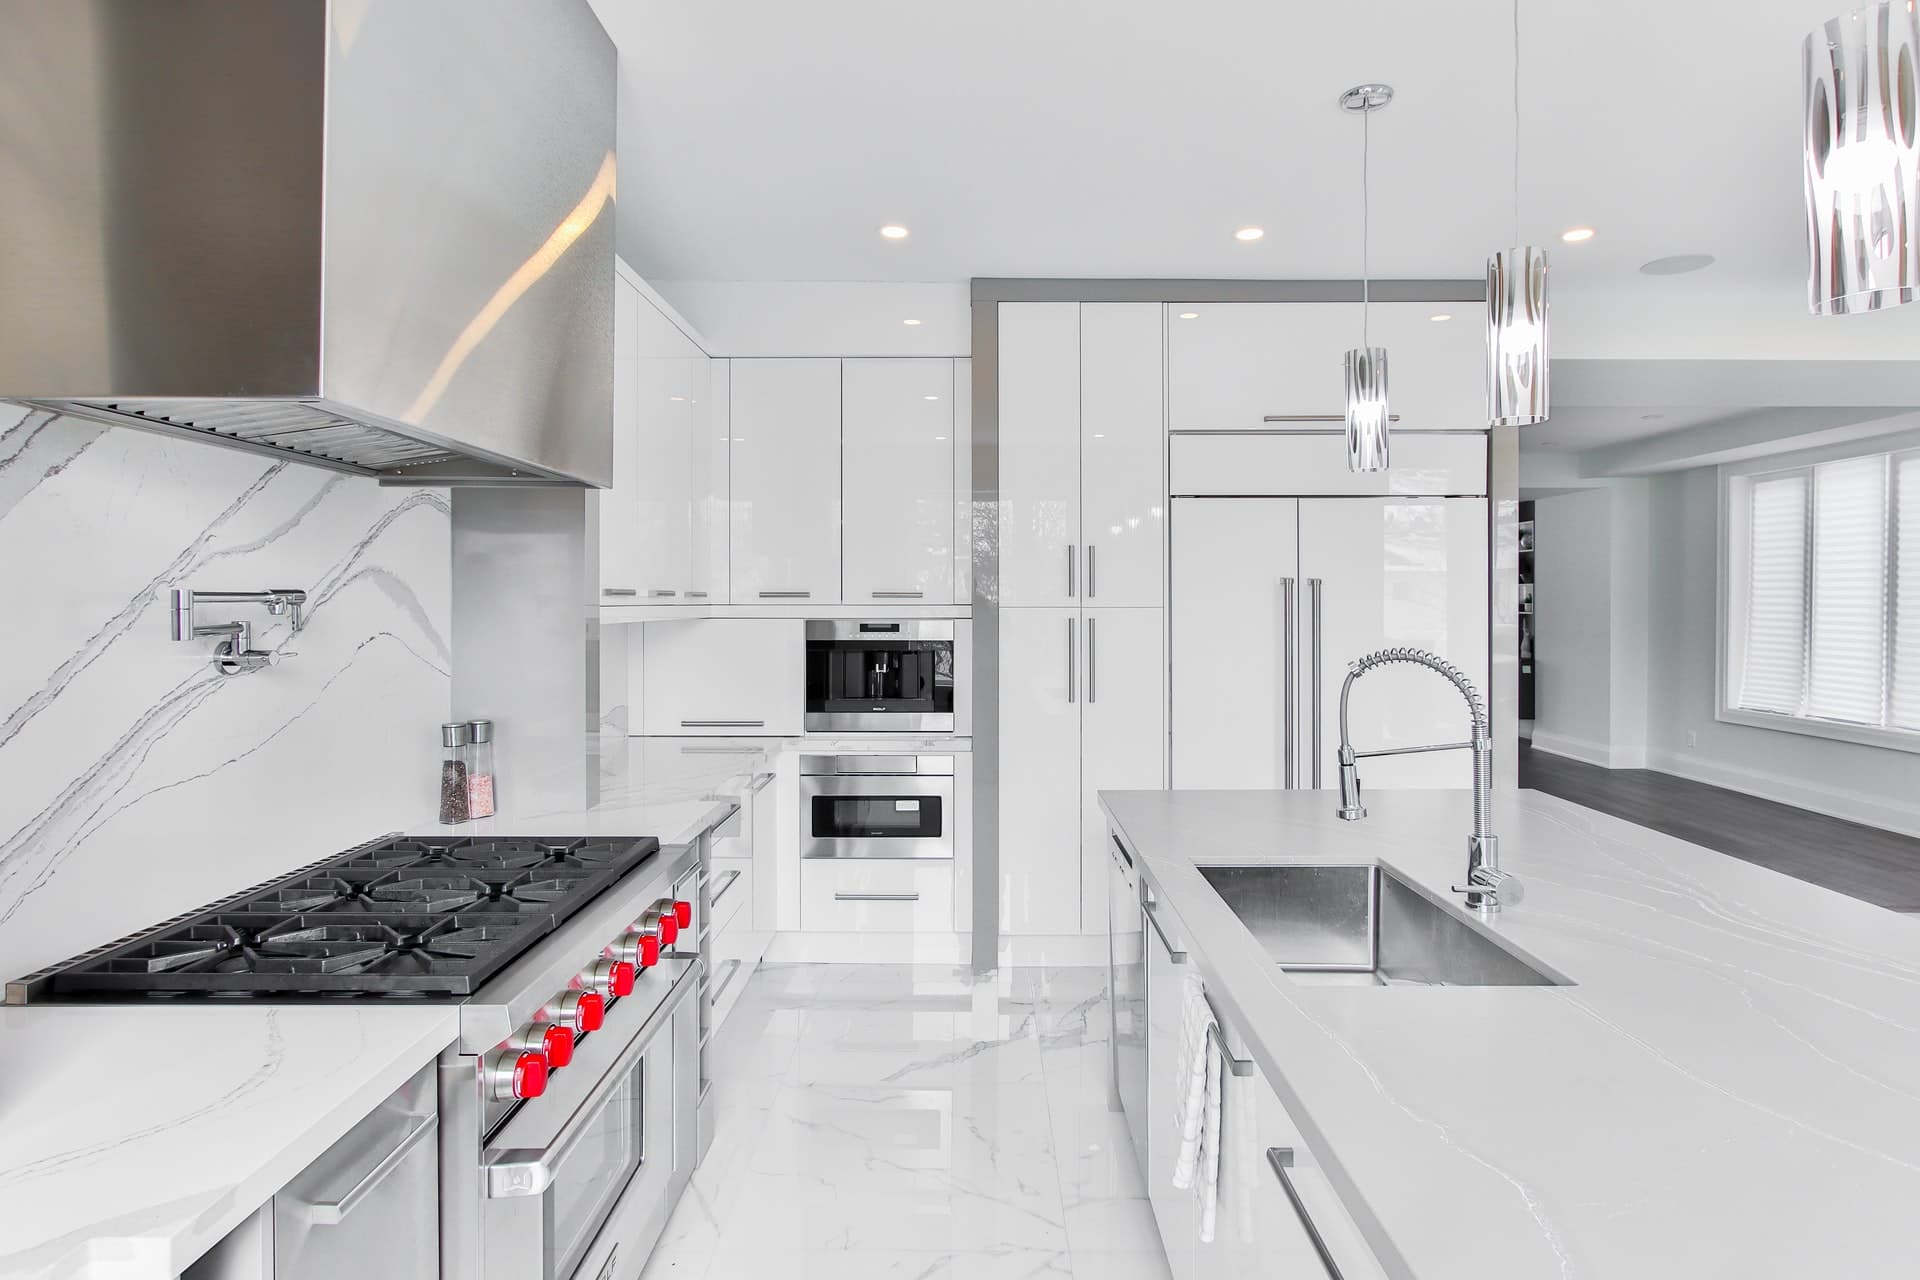 How to Get the Lowest Price on countertops in Reno